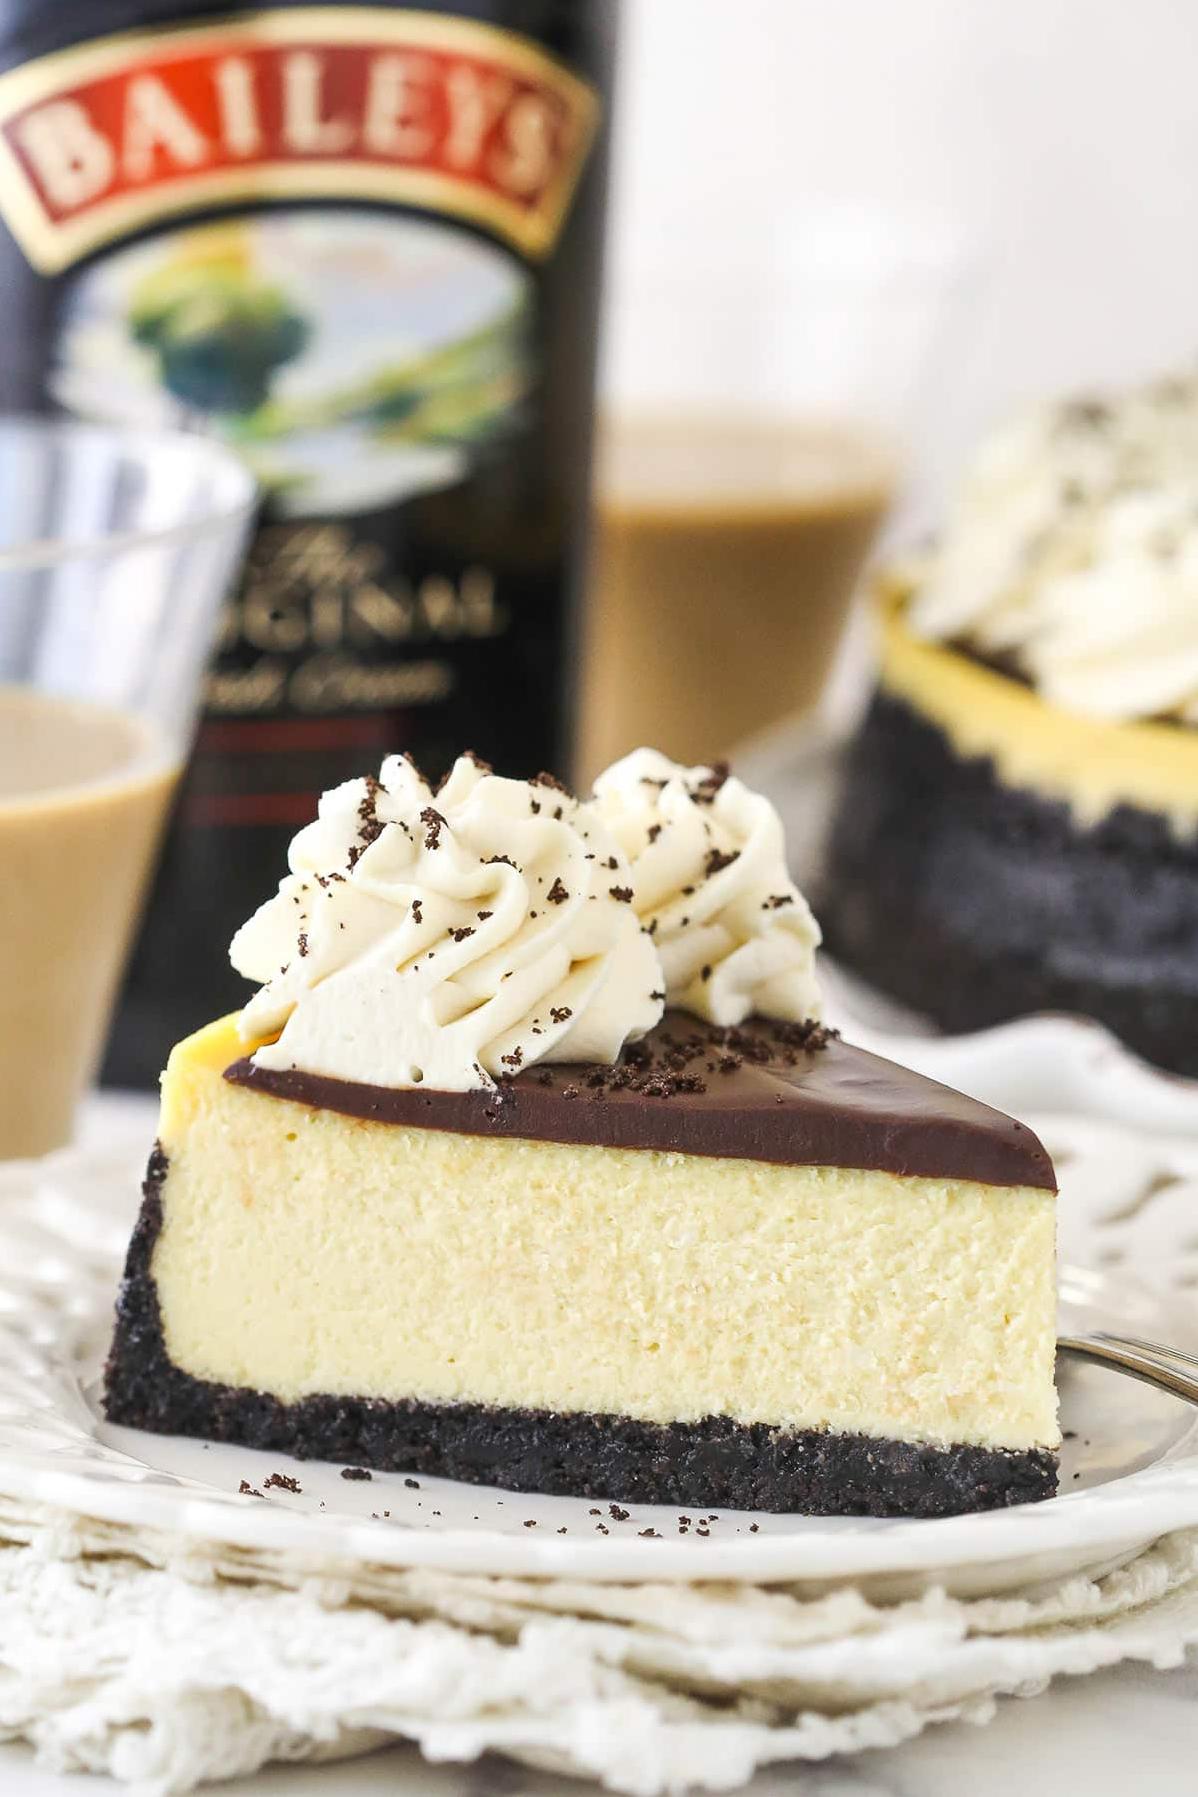  Smooth and creamy, this cheesecake embodies comfort food at its finest.